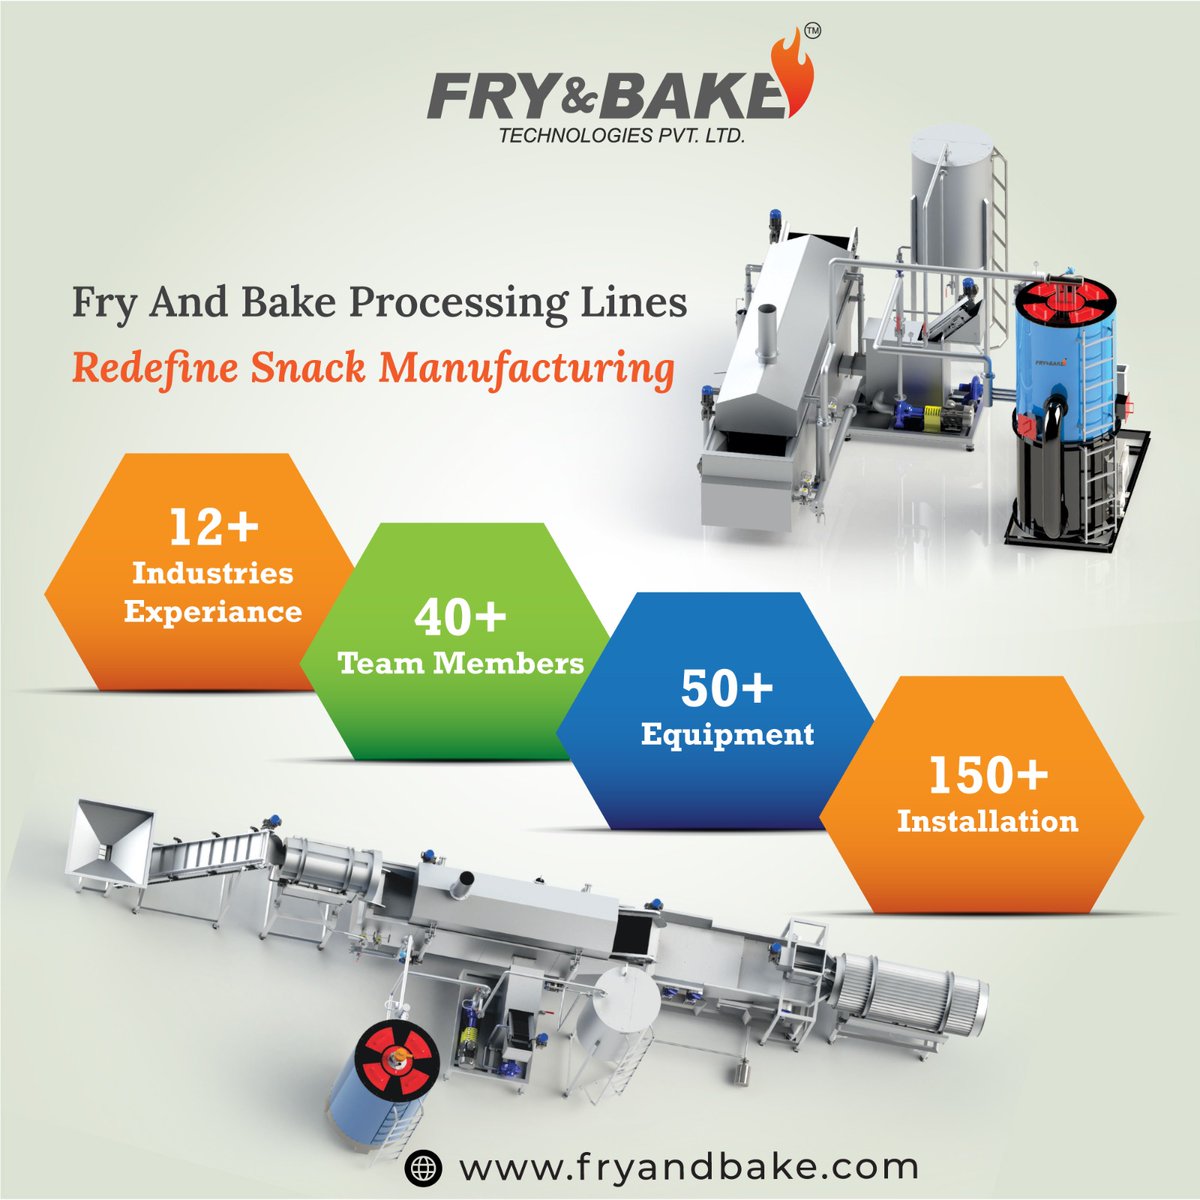 Explore revolutionary snack manufacturing solutions at Fry & Bake Technologies Pvt. Ltd. Discover innovative solutions for your snack production needs!

Visit: fryandbake.com
Call: +91 9909776066

#SnackInnovation #FoodTech #SnackIndustry #FryAndBakeTech #FoodProcessing